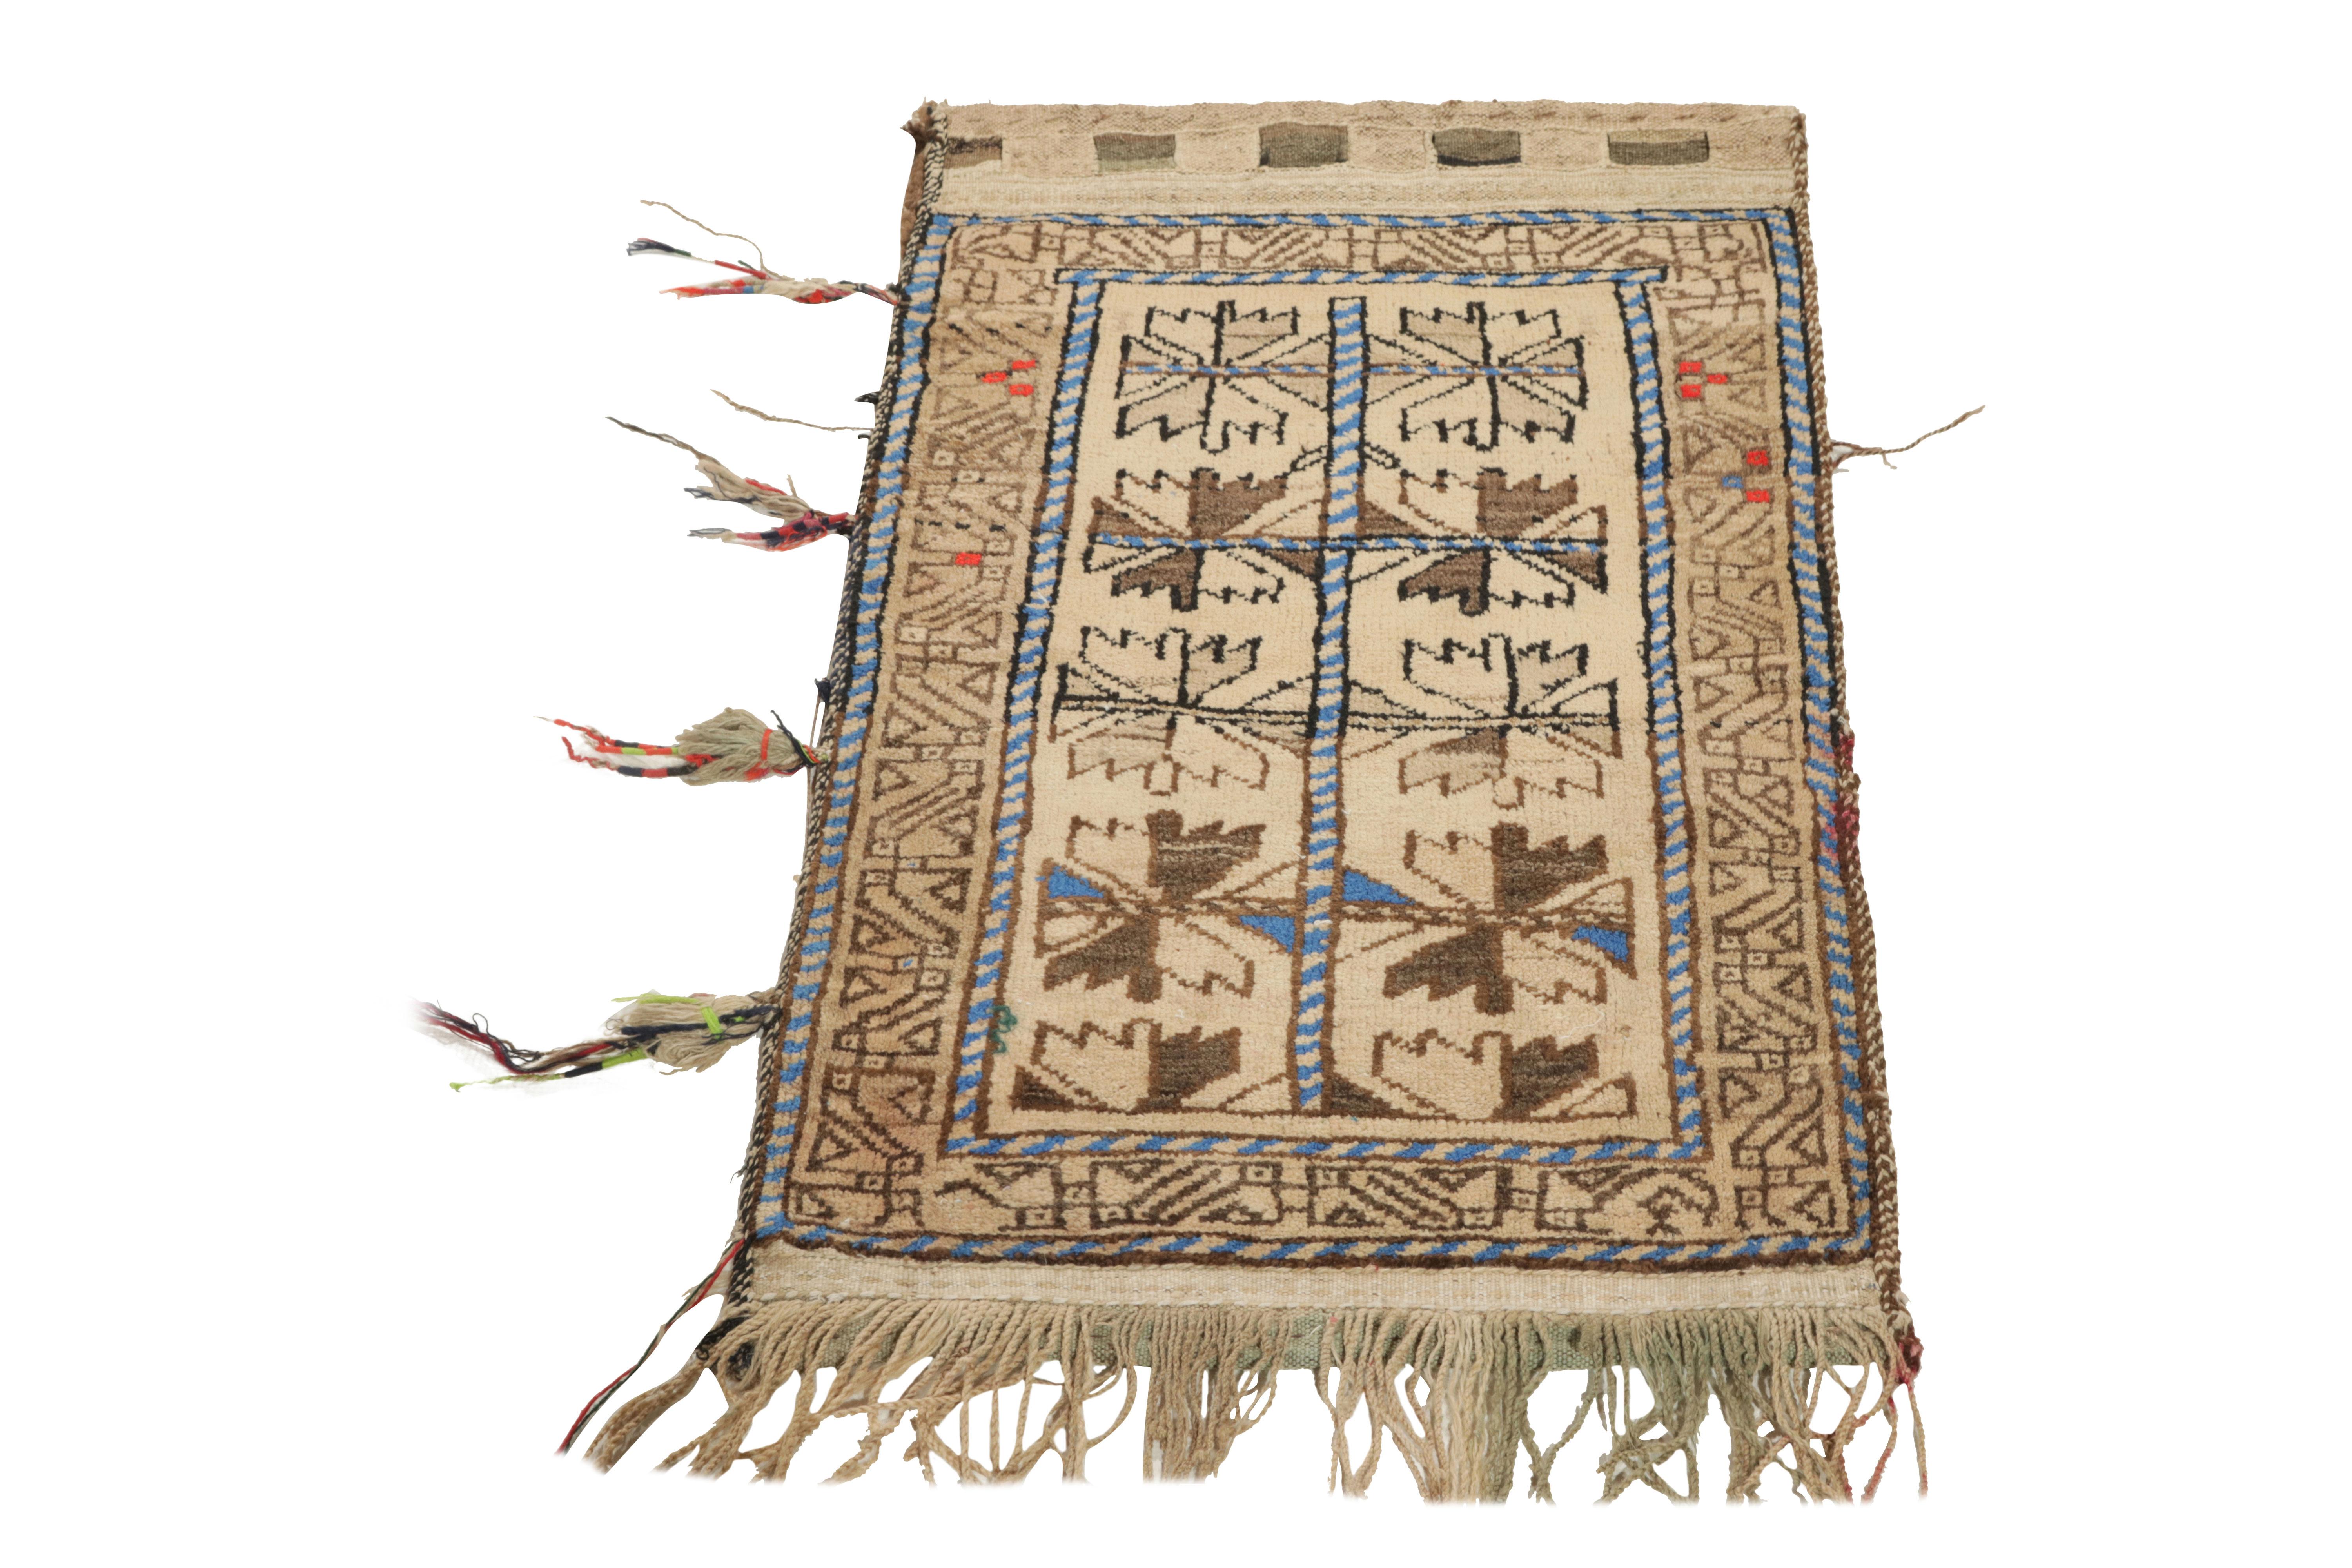 An ode to the nomadic sensibilities of Baluchistan, a 2x3 antique Baluch rug originating from Persia circa 1920-1930. The rustic imagination features a geometric pattern in brown & blue blending seamlessly with traditional motifs on the border - all